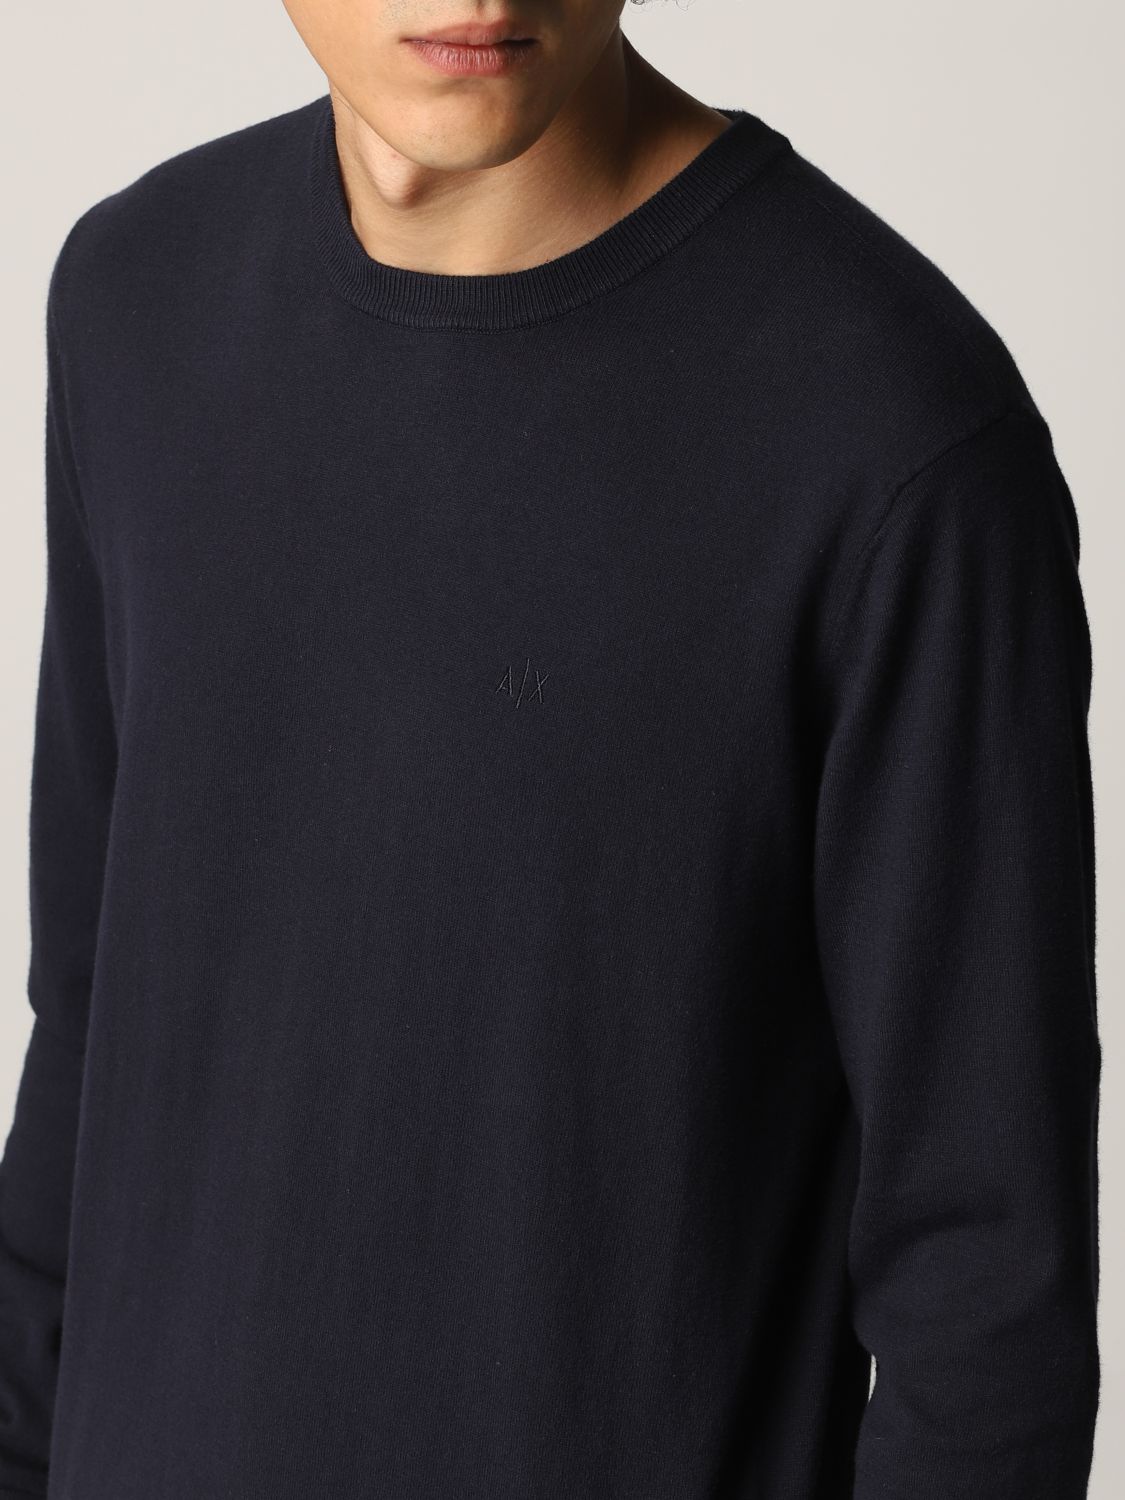 ARMANI EXCHANGE: cotton sweater with embroidered logo - Navy | Armani ...